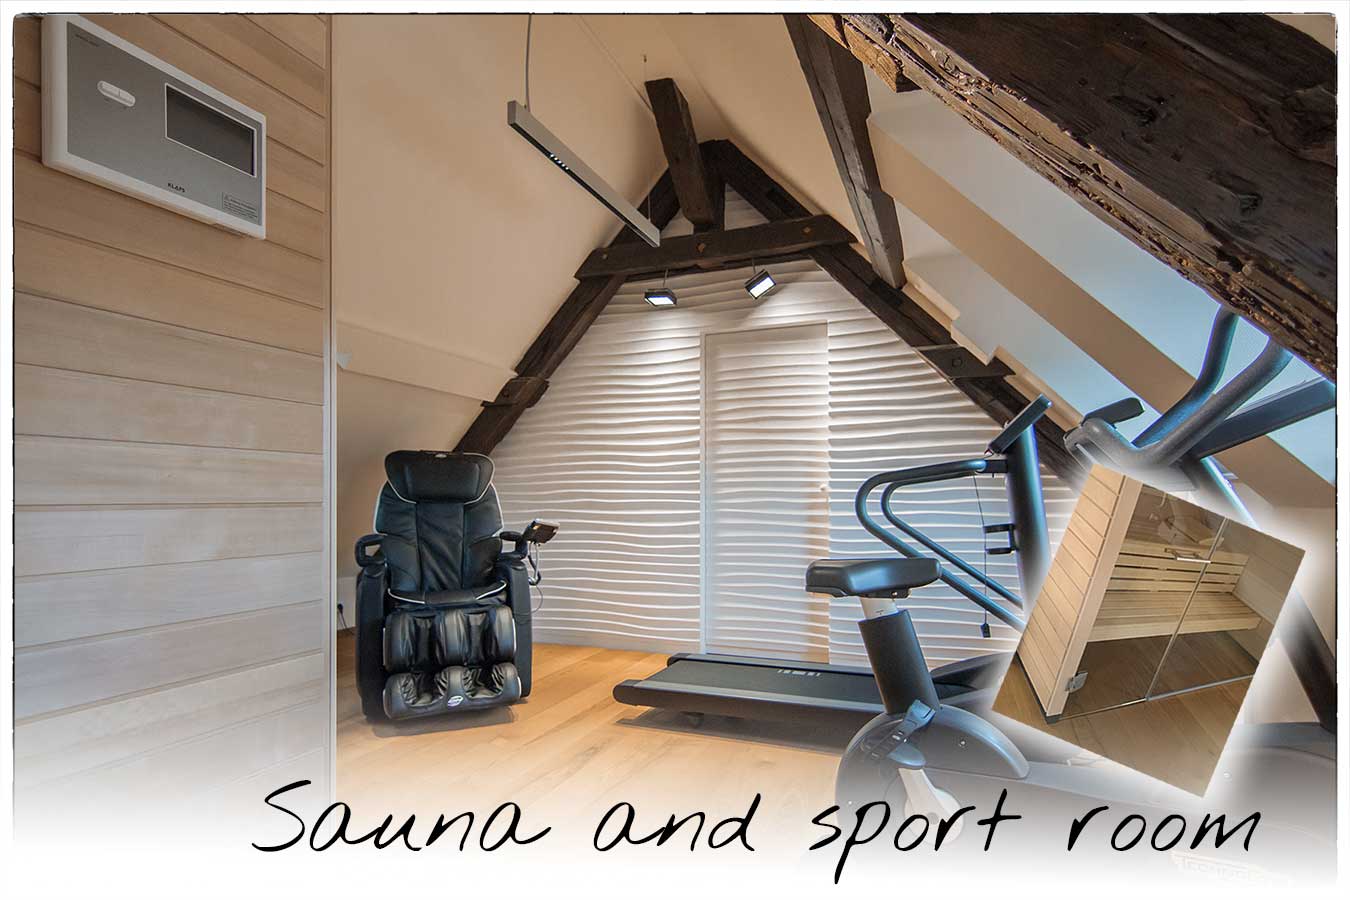 sport room for personal use